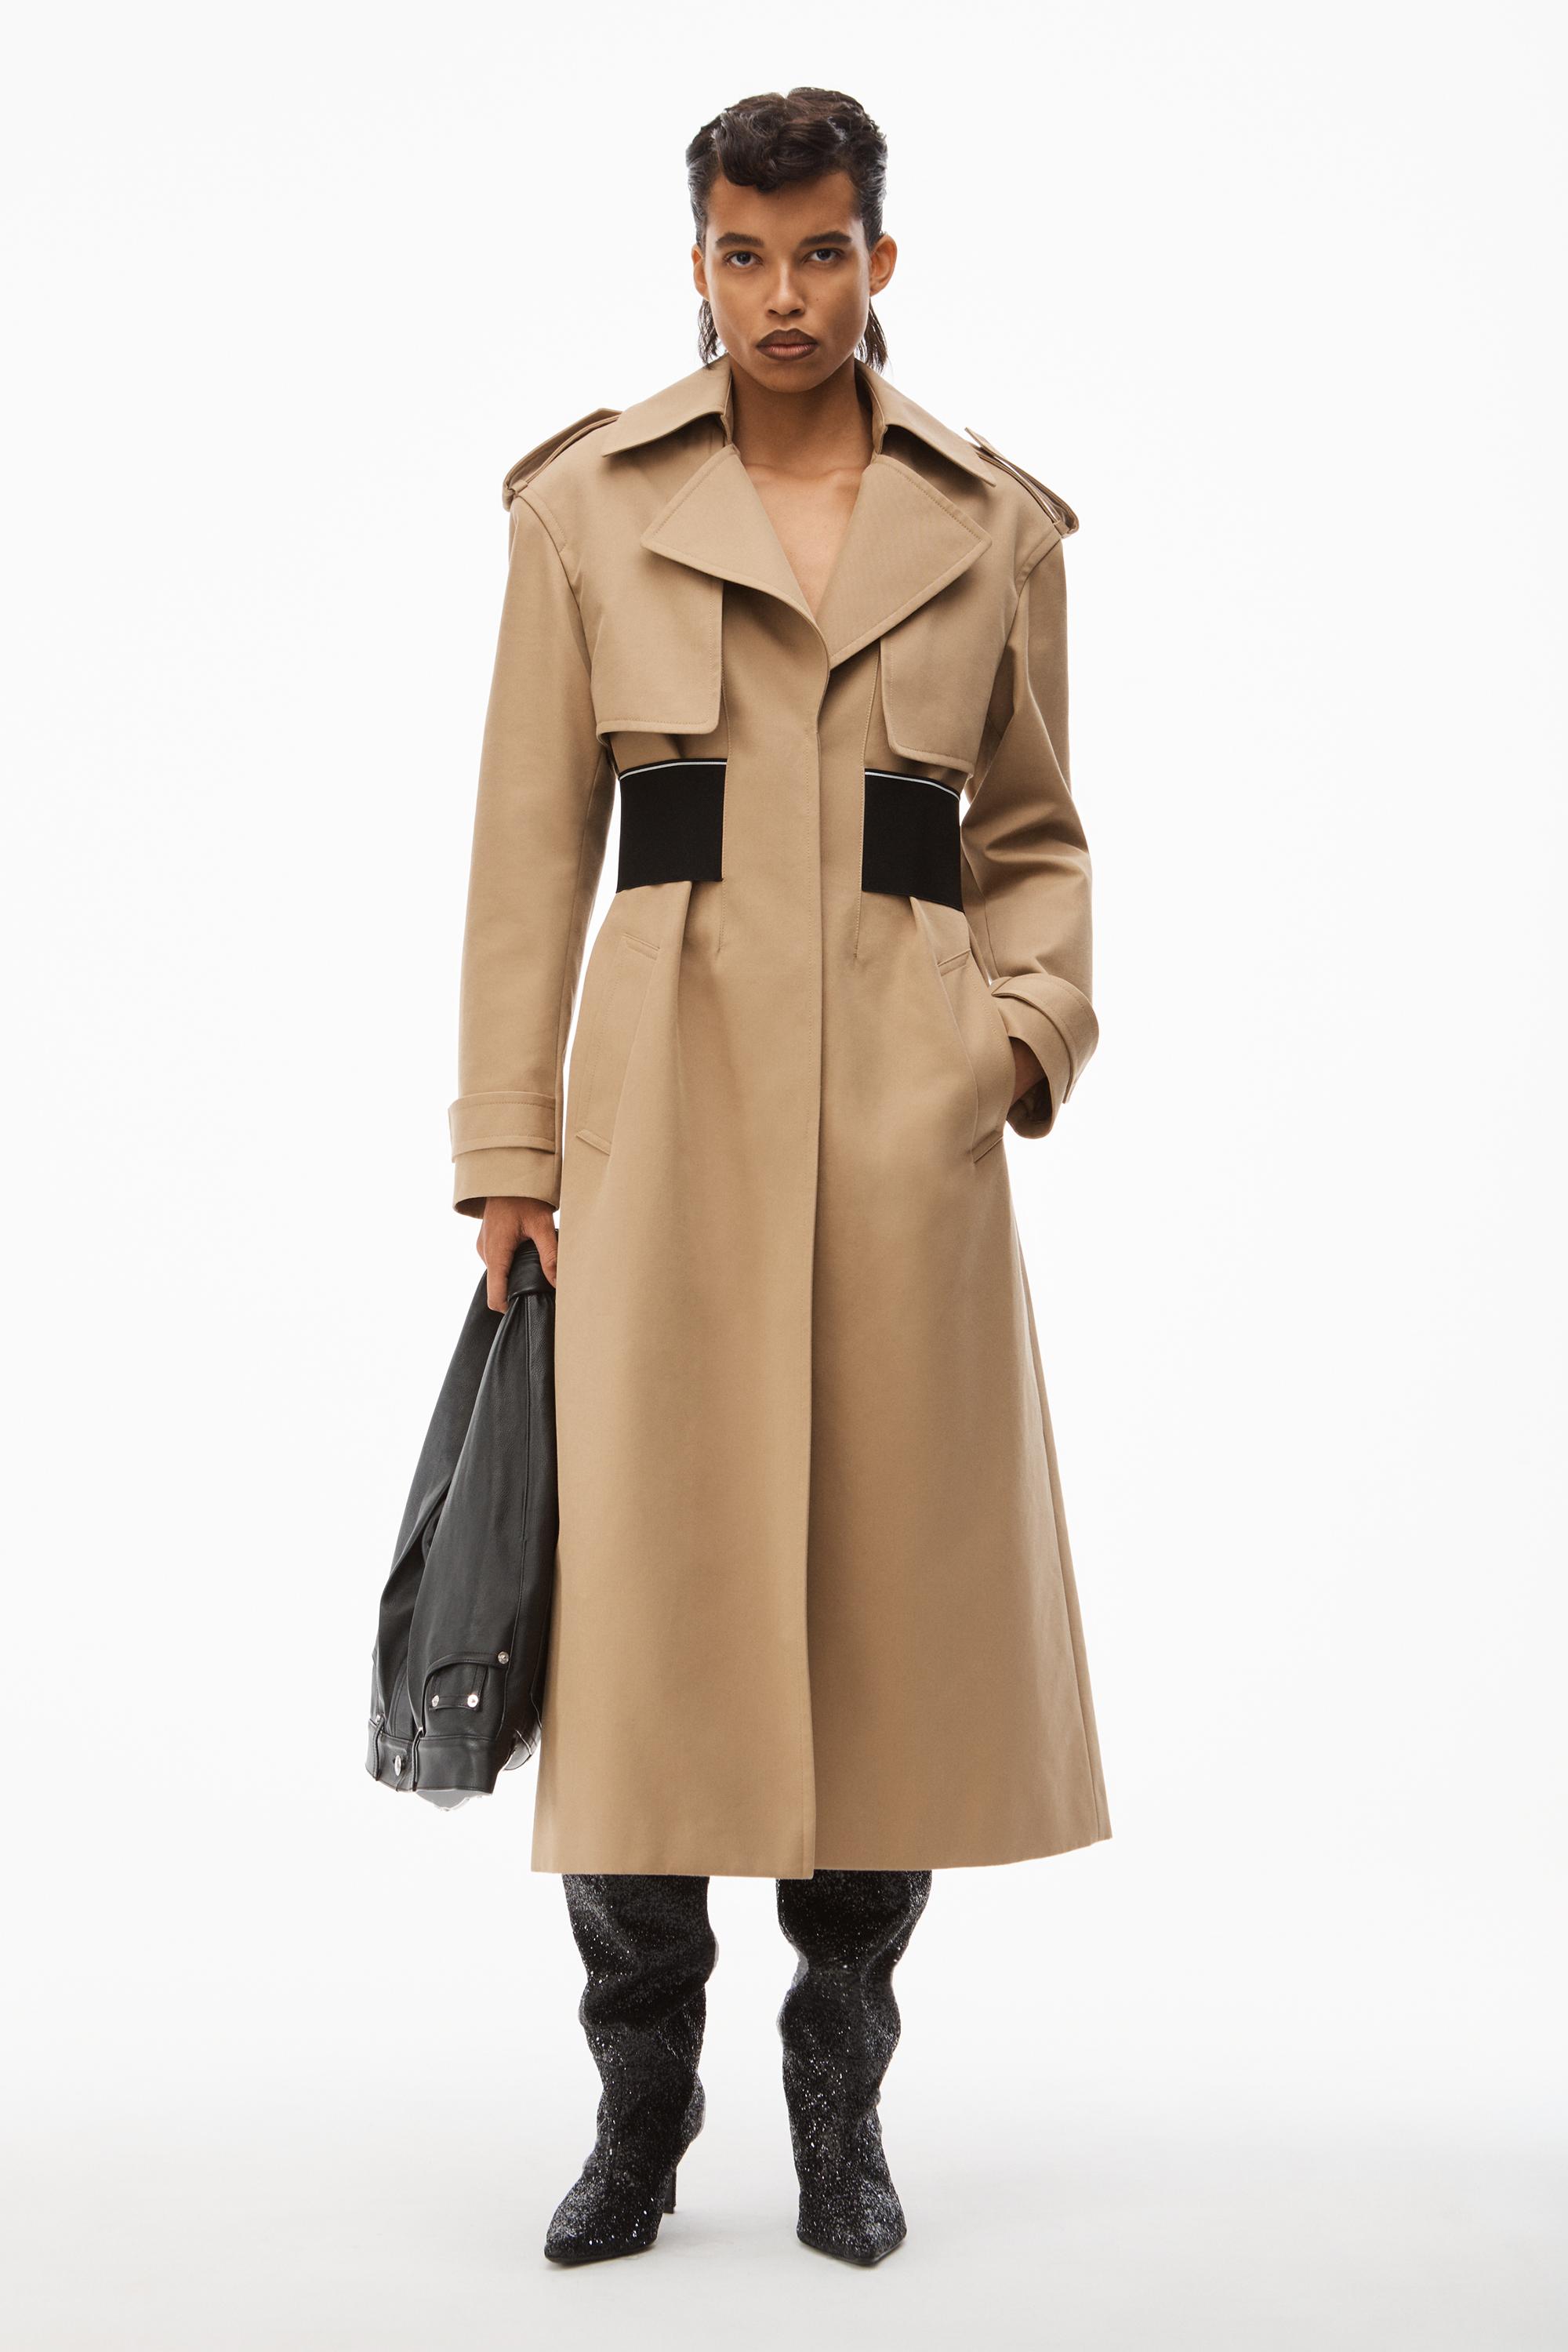 assimilation blast sø Alexander Wang Logo Trench Coat In Cotton Tailoring in Natural | Lyst